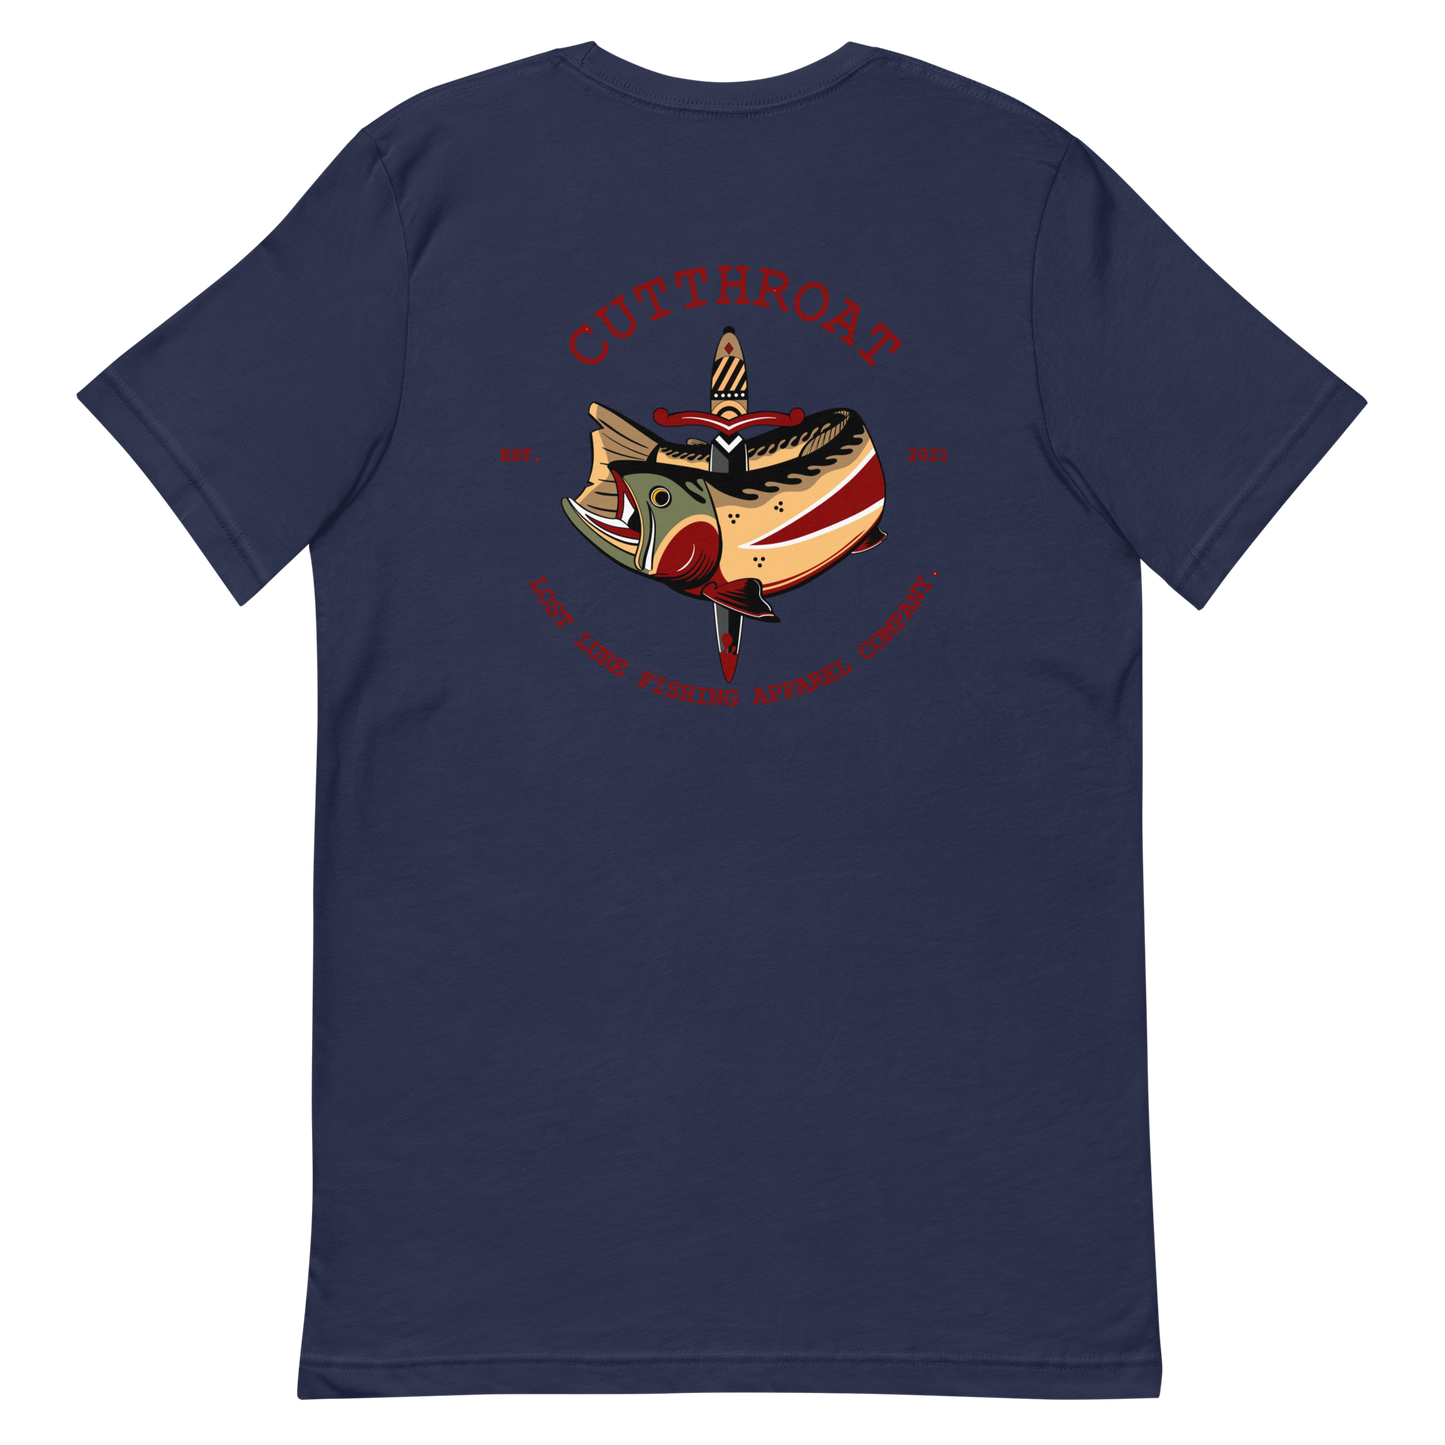 Cutthroat Trout fishing shirt. It’s an American traditional style design with a cutthroat trout and a dagger. The shirt reads Cutthroat trout, est. 2021, lost lure fishing apparel company. The front of the shirt has the lost lure logo. Dark blue fishing shirt, back side